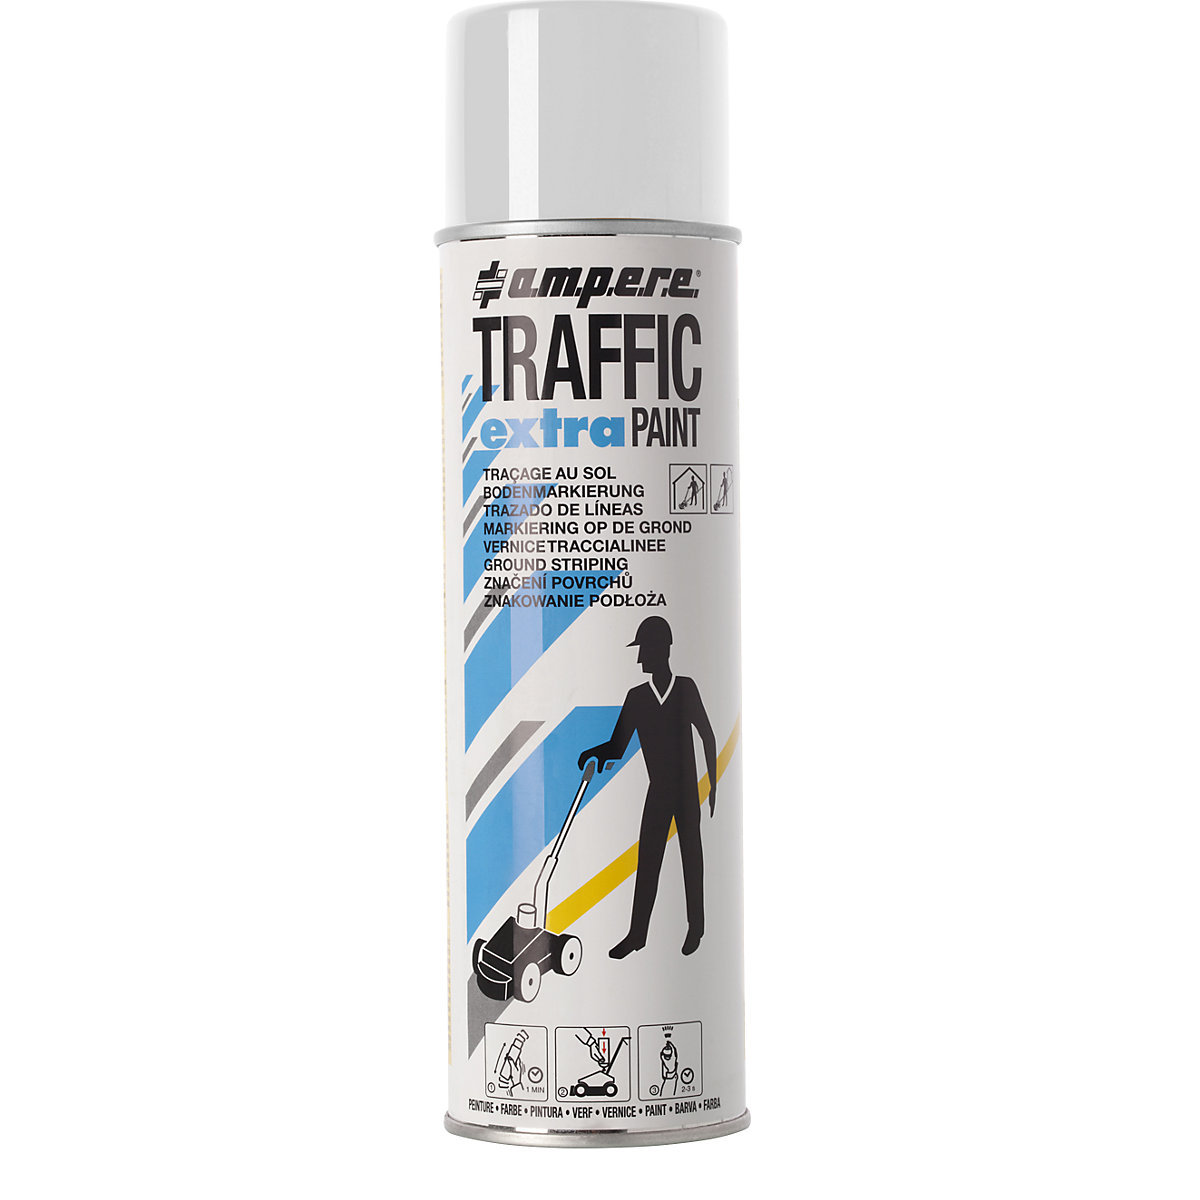 Traffic extra Paint® marking paint for demanding applications - Ampere